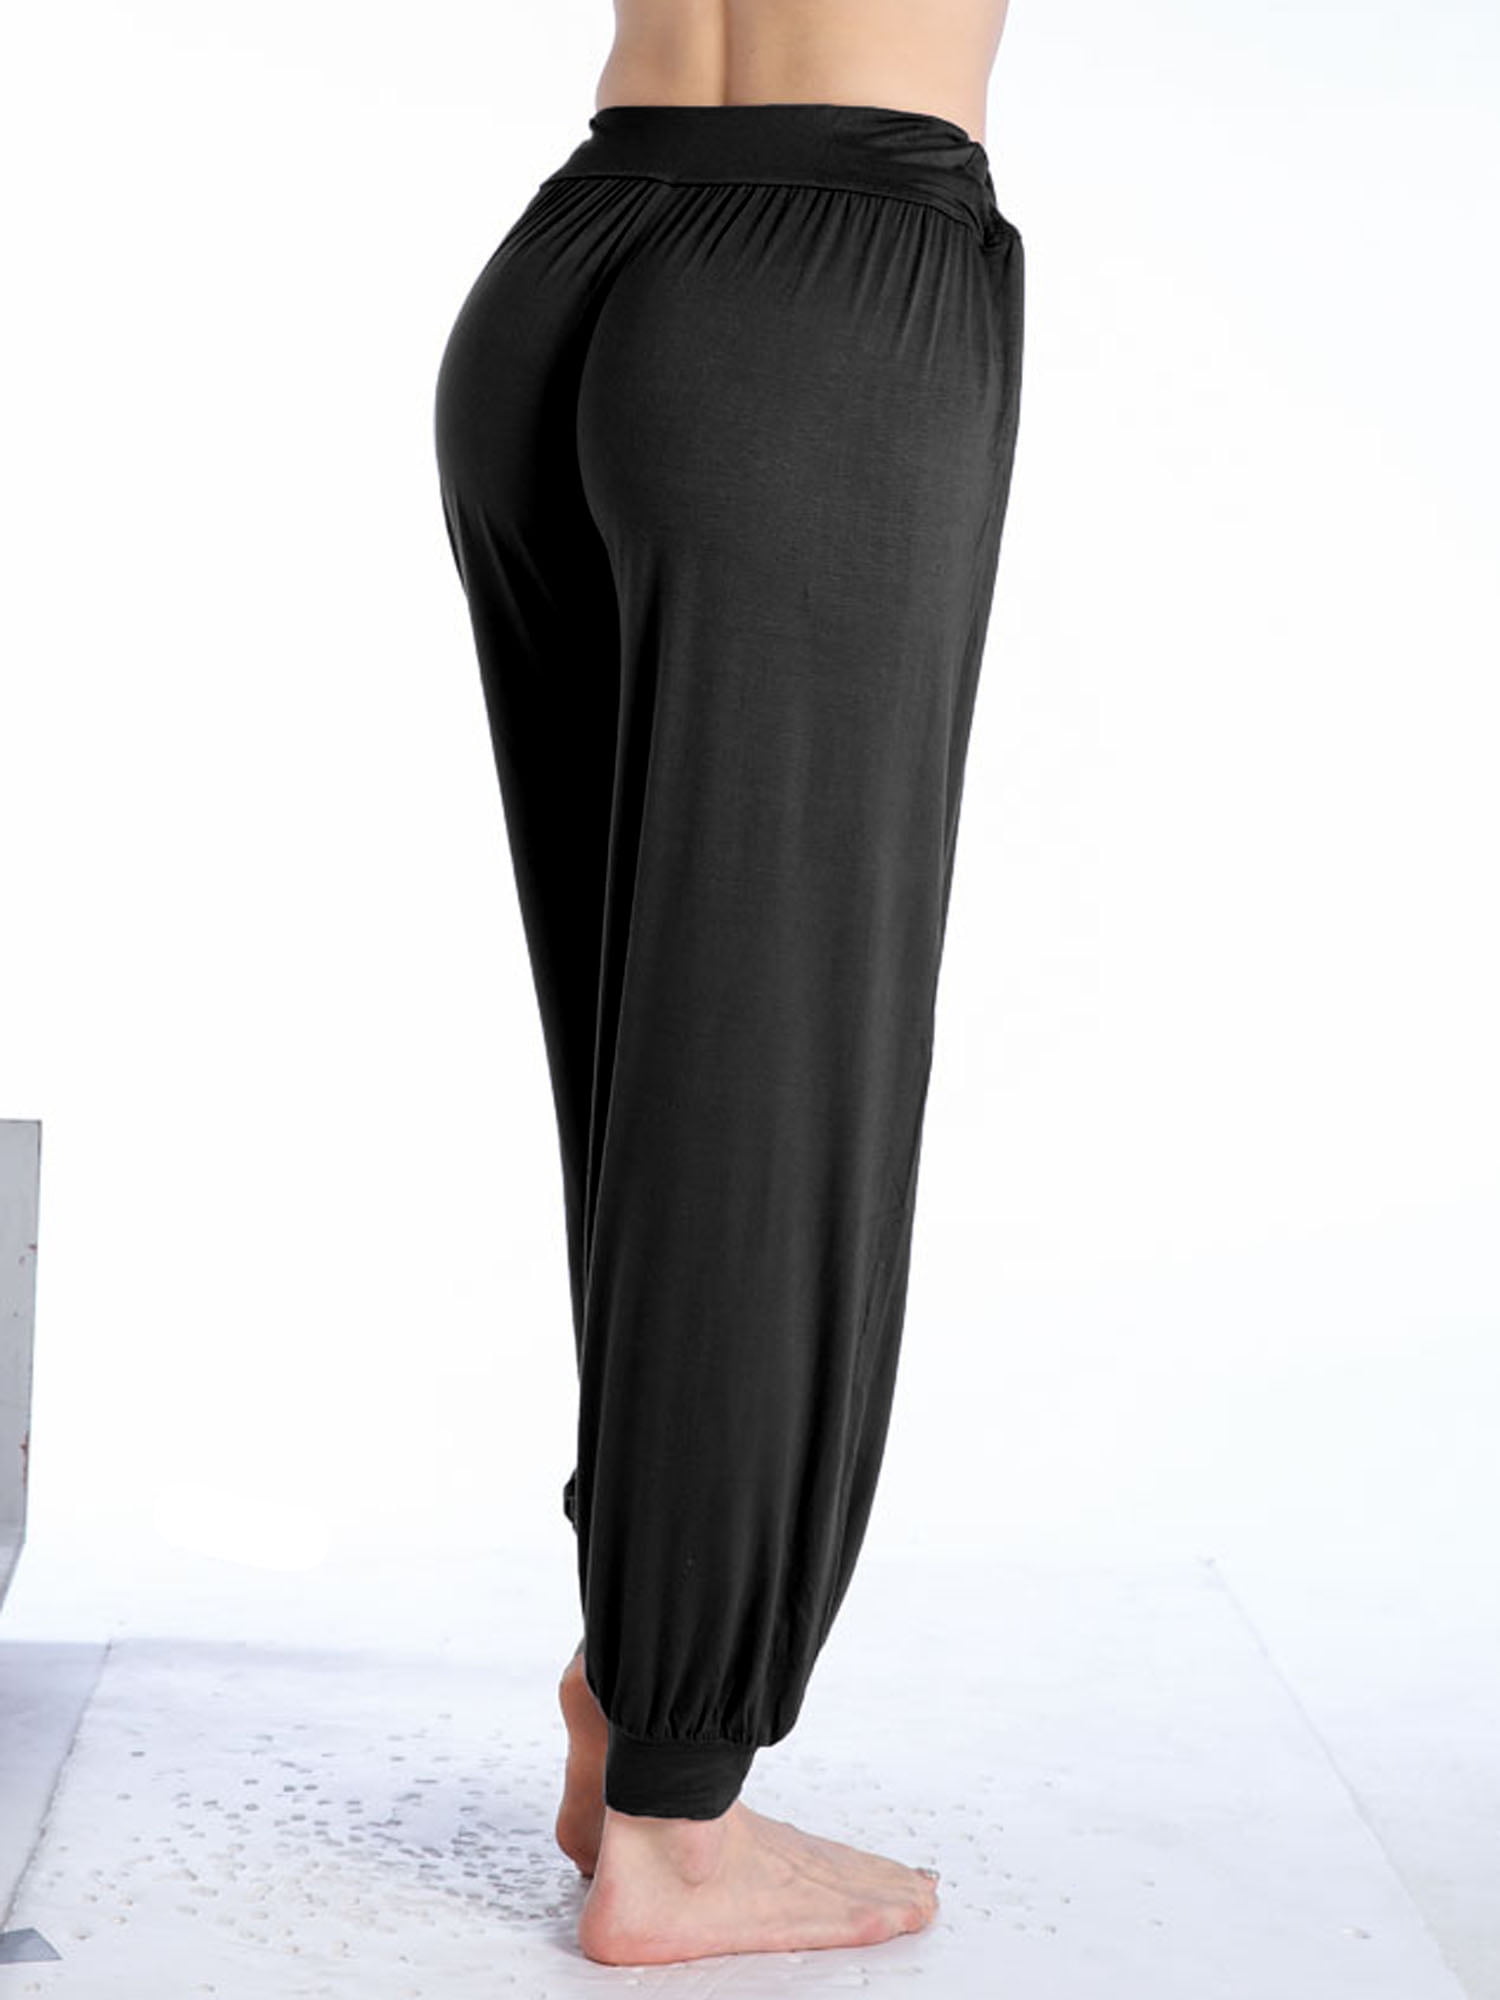 DODOING Women's Casual Yoga Pants Loose Fit Style Trousers Wide Leg  Activewear Relaxed Fit Pants Black/ Gray/ Dark Grey